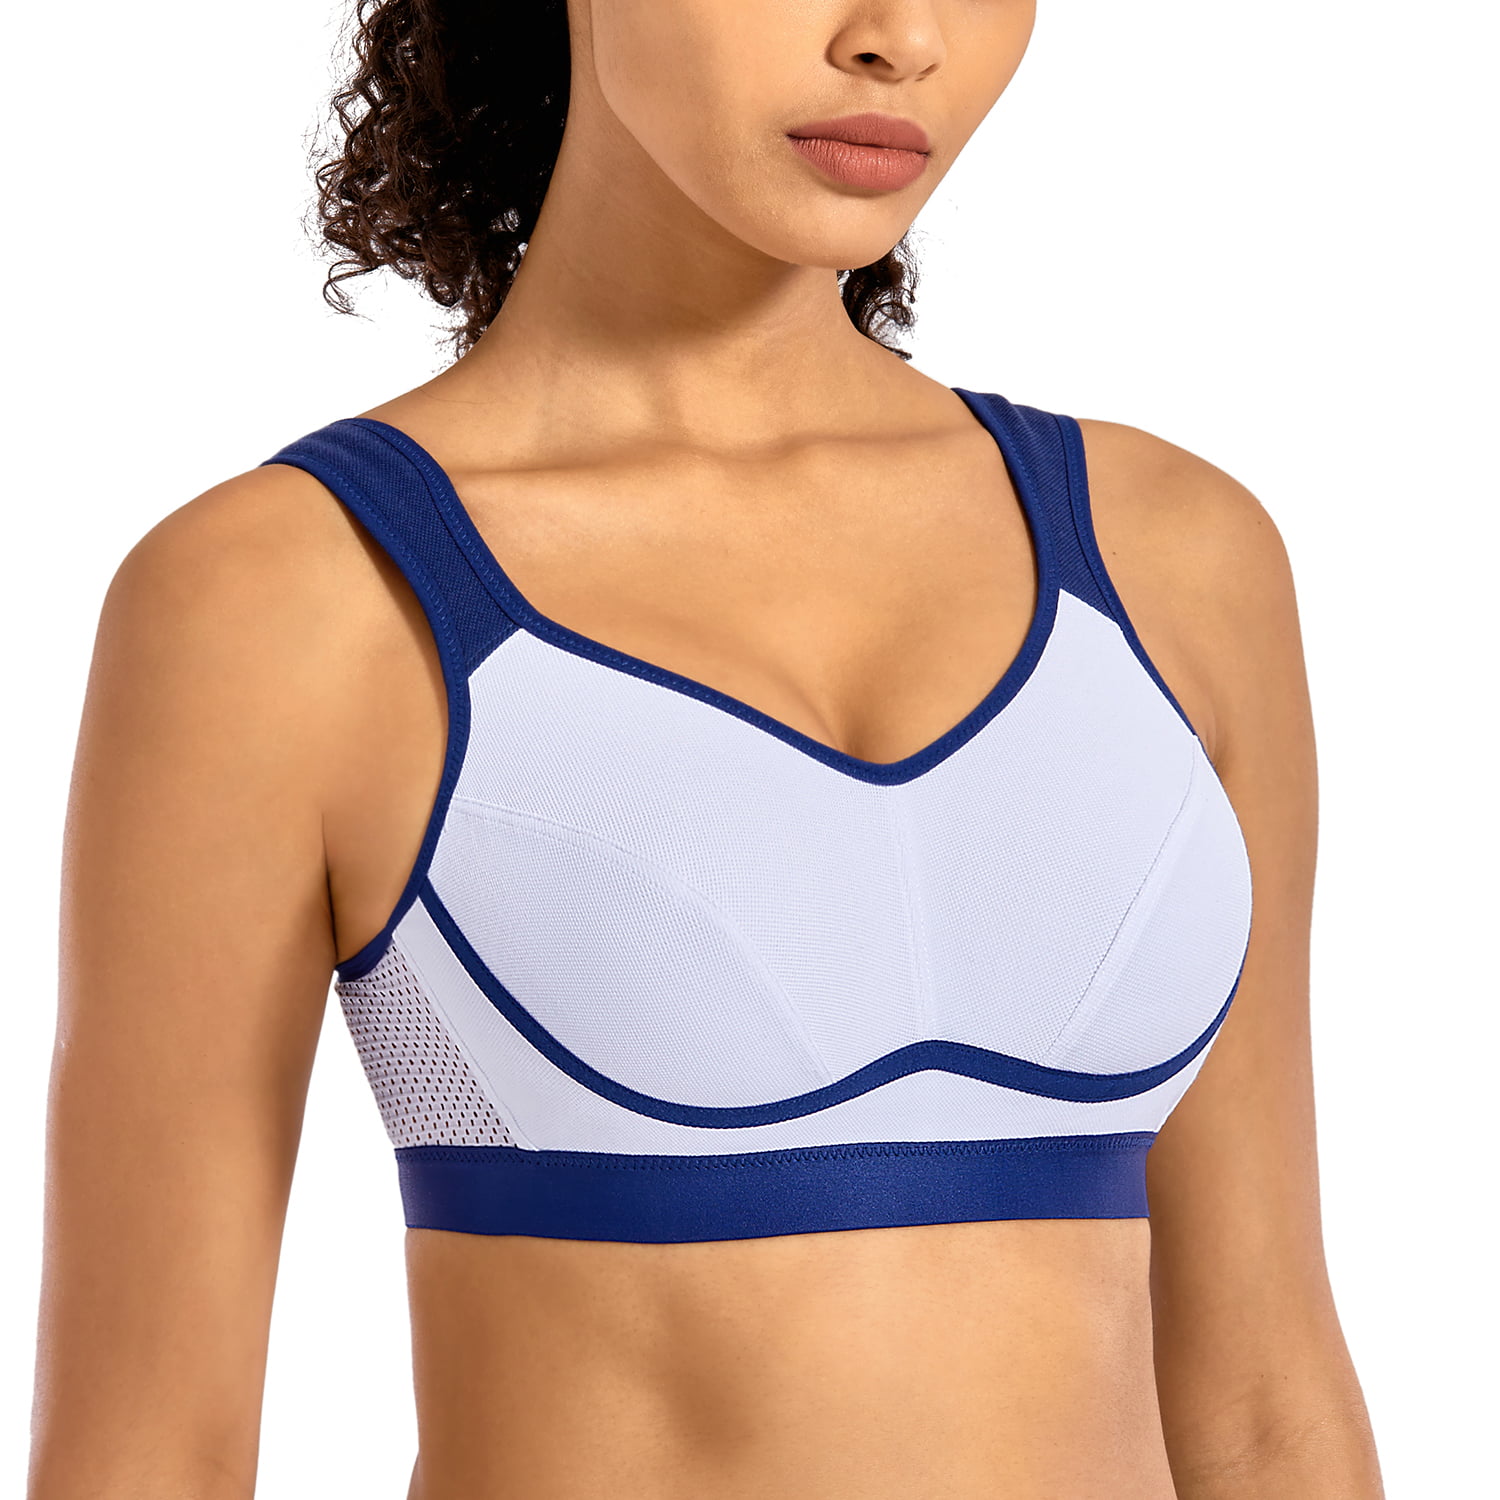 SYROKAN Women's Workout Gym Support Bounce Control Plus Size High Impact Sports Bra Wirefree 